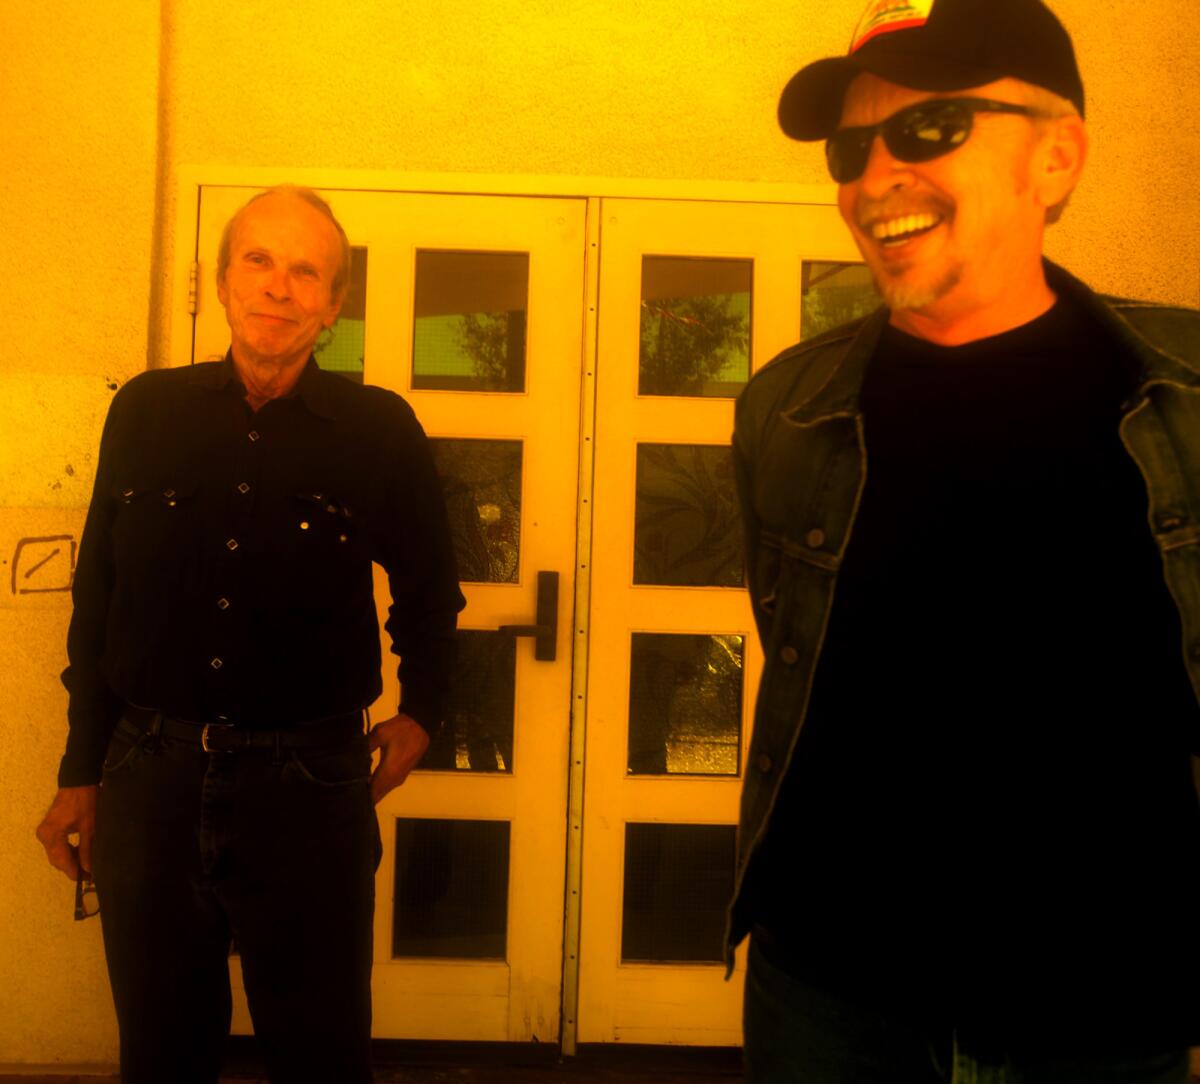 Siblings Phil, left, and Dave Alvin in Downey on Aug. 31, 2015. The brothers' new album, "Lost Time," further explores the blues and R&B influences that inspired the Downey residents as kids before they grew up and formed the Blasters roots-rock band.